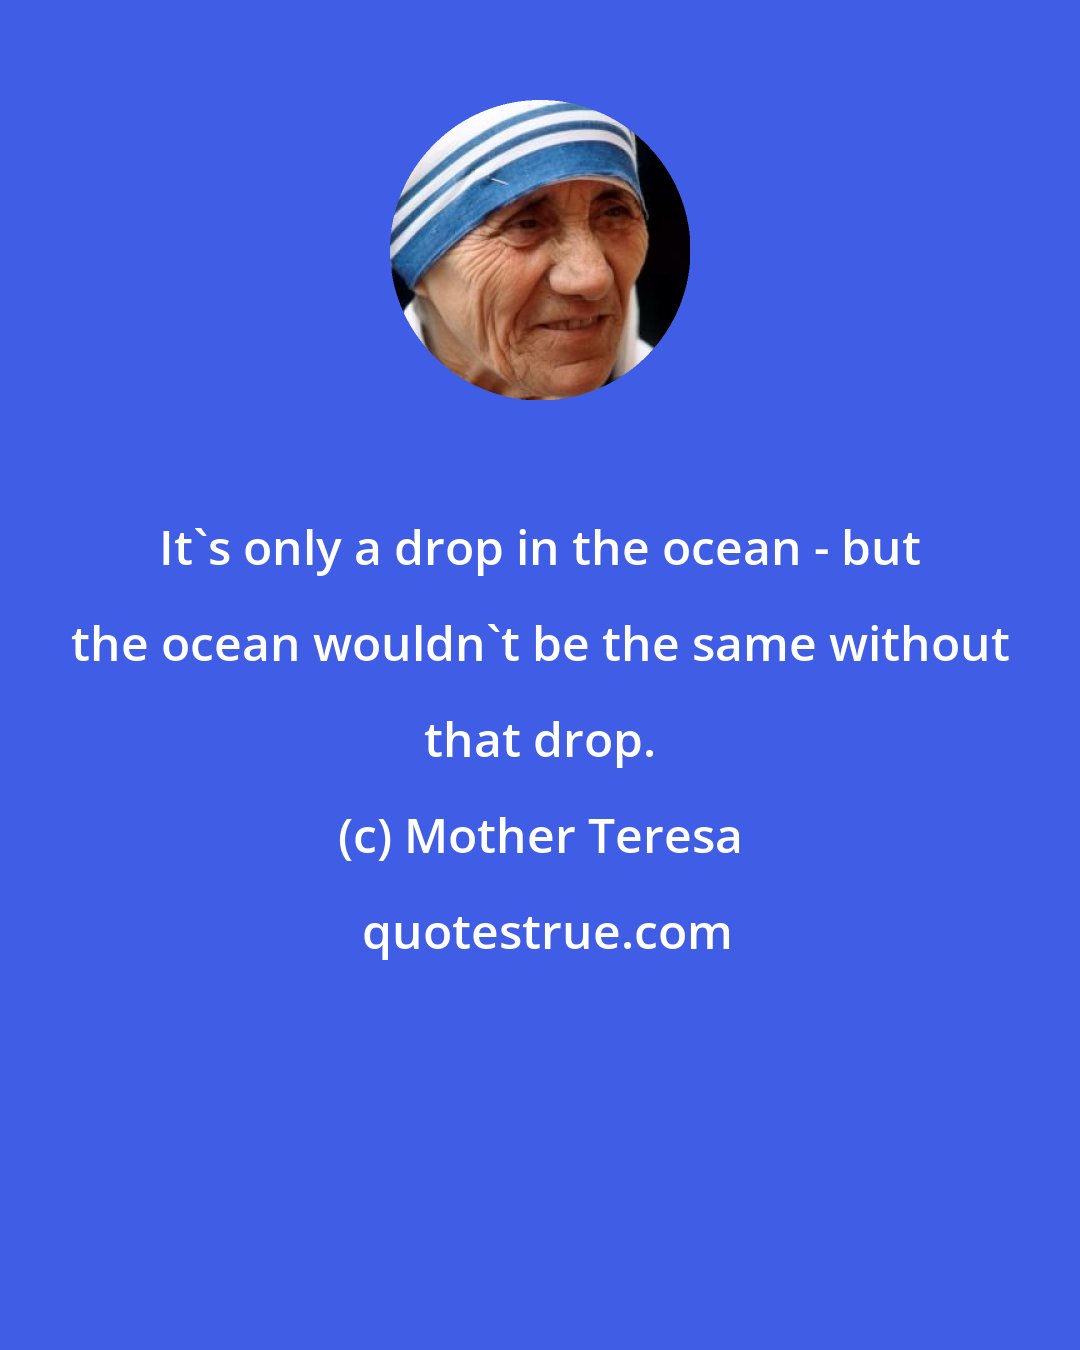 Mother Teresa: It's only a drop in the ocean - but the ocean wouldn't be the same without that drop.